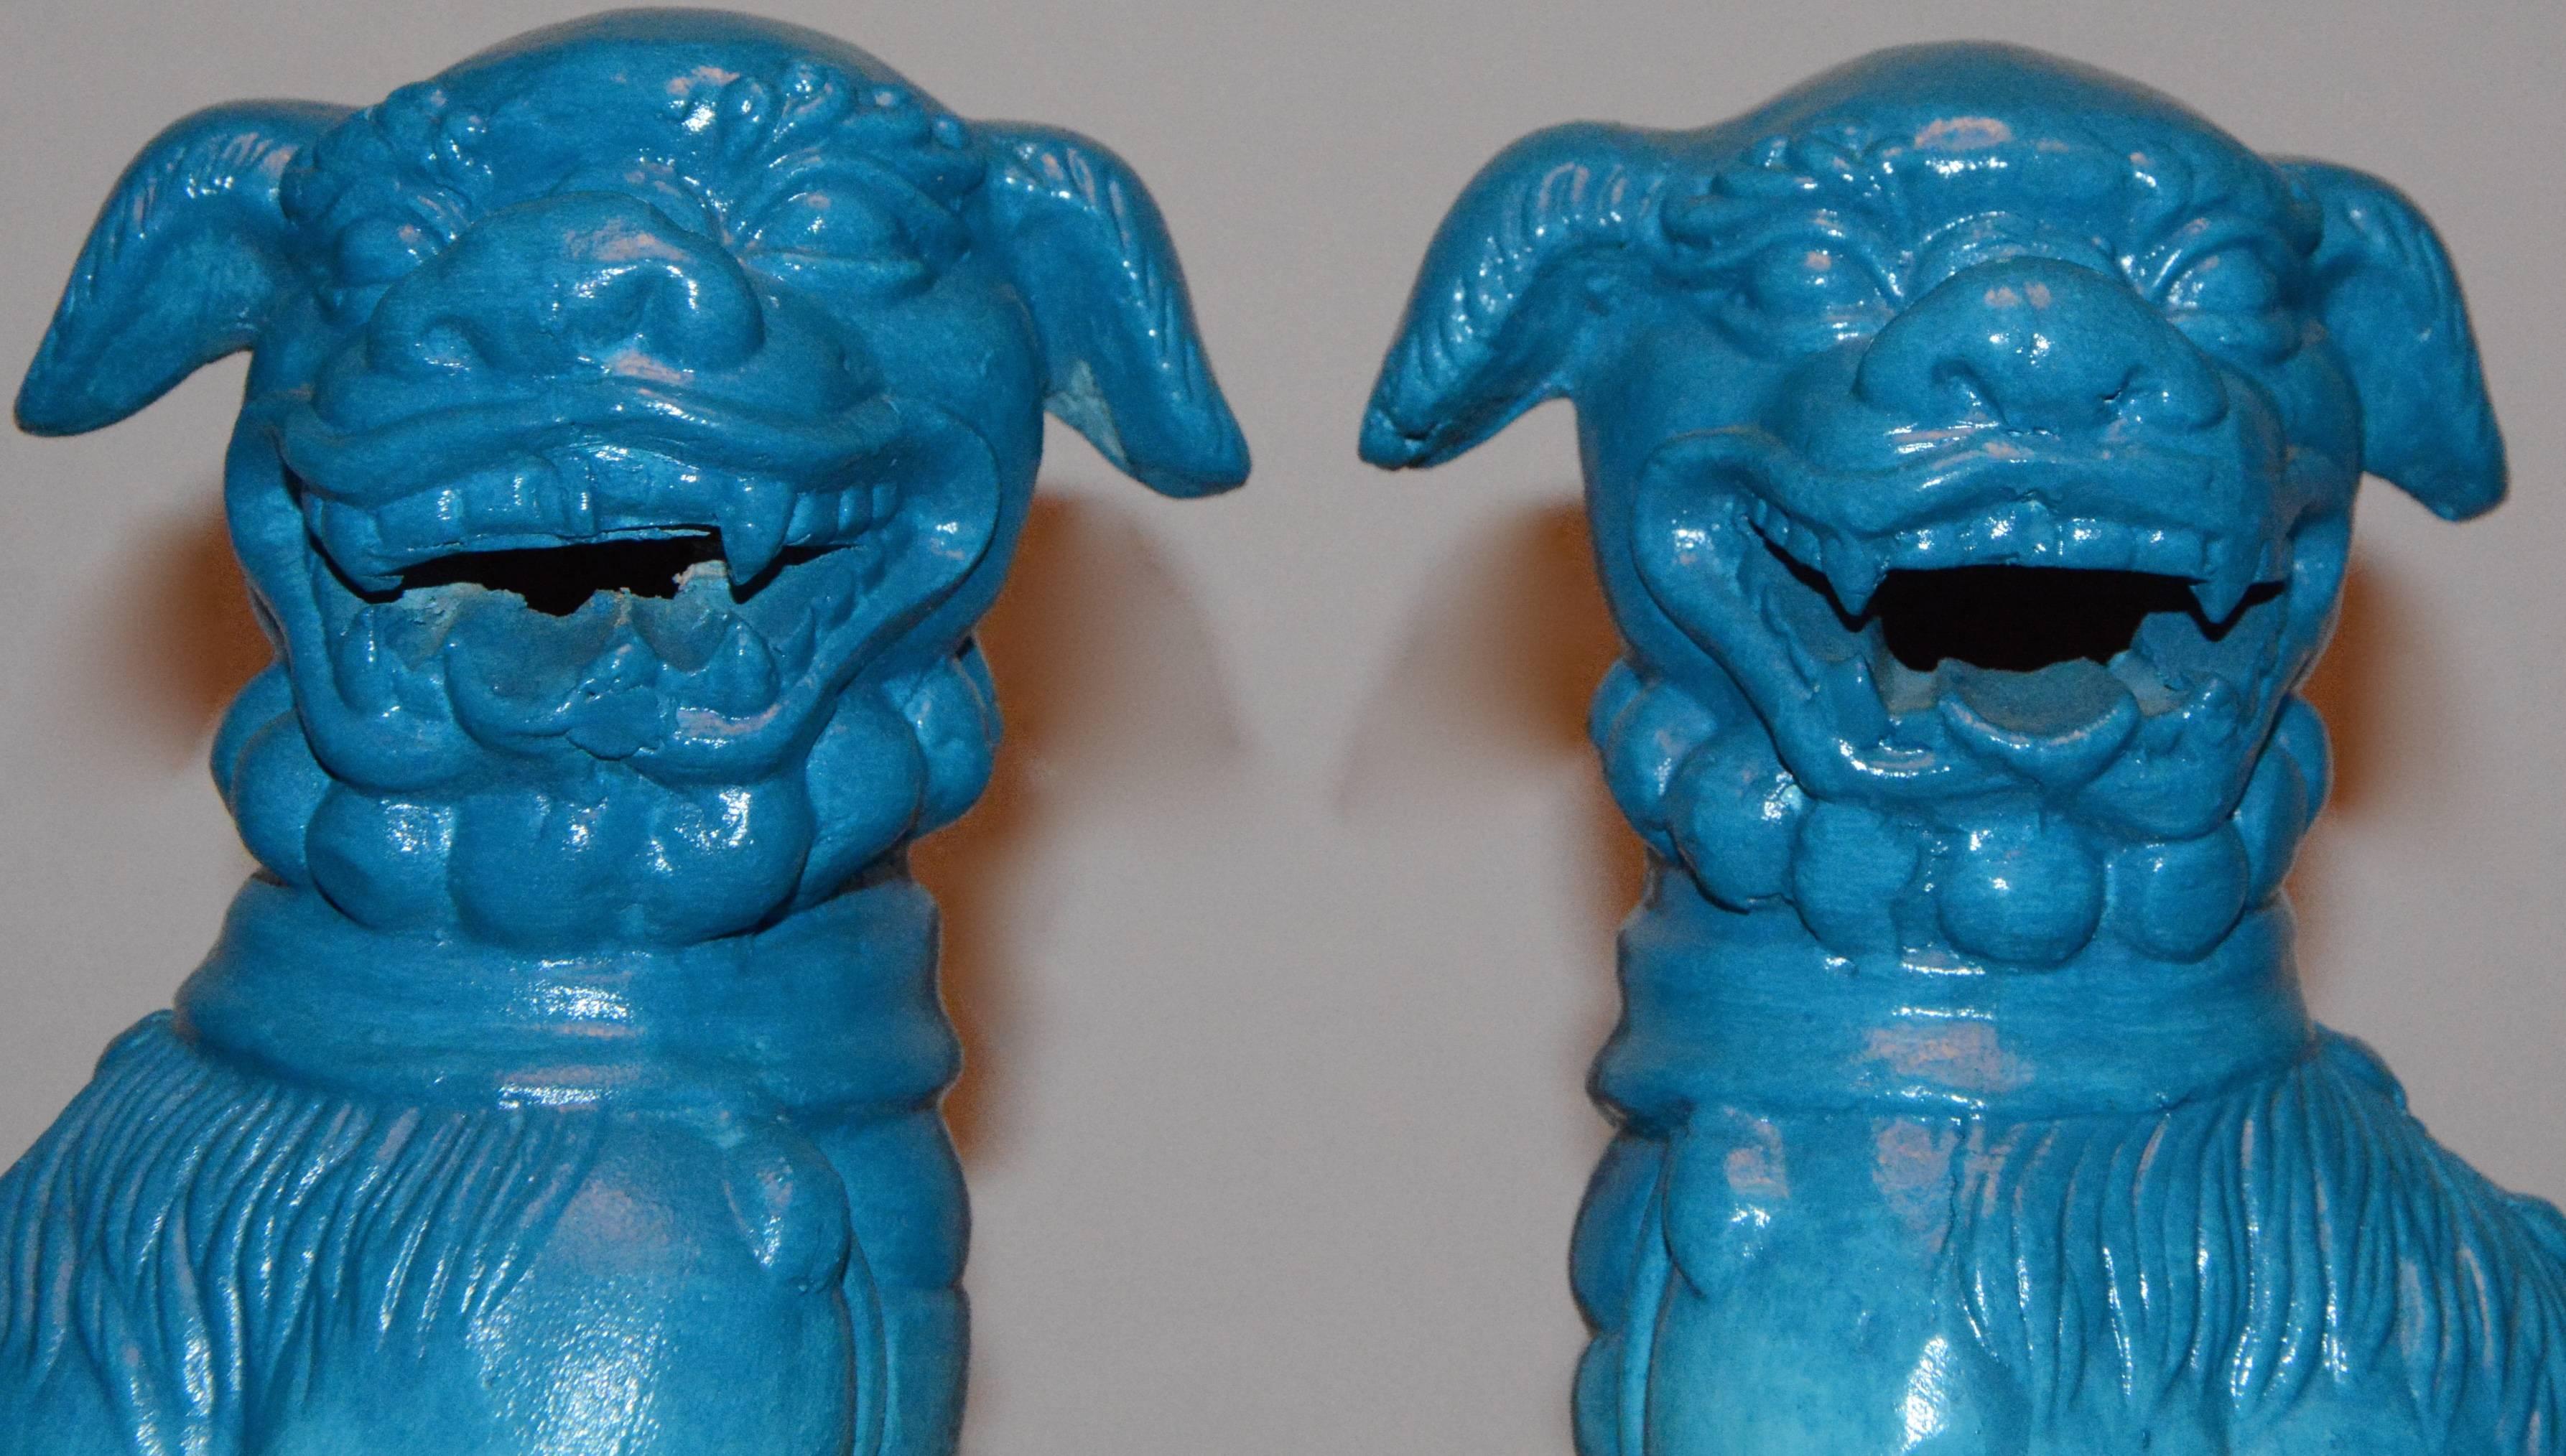 Glazed Pair of Chinese Blue Ceramic Guardian Lion